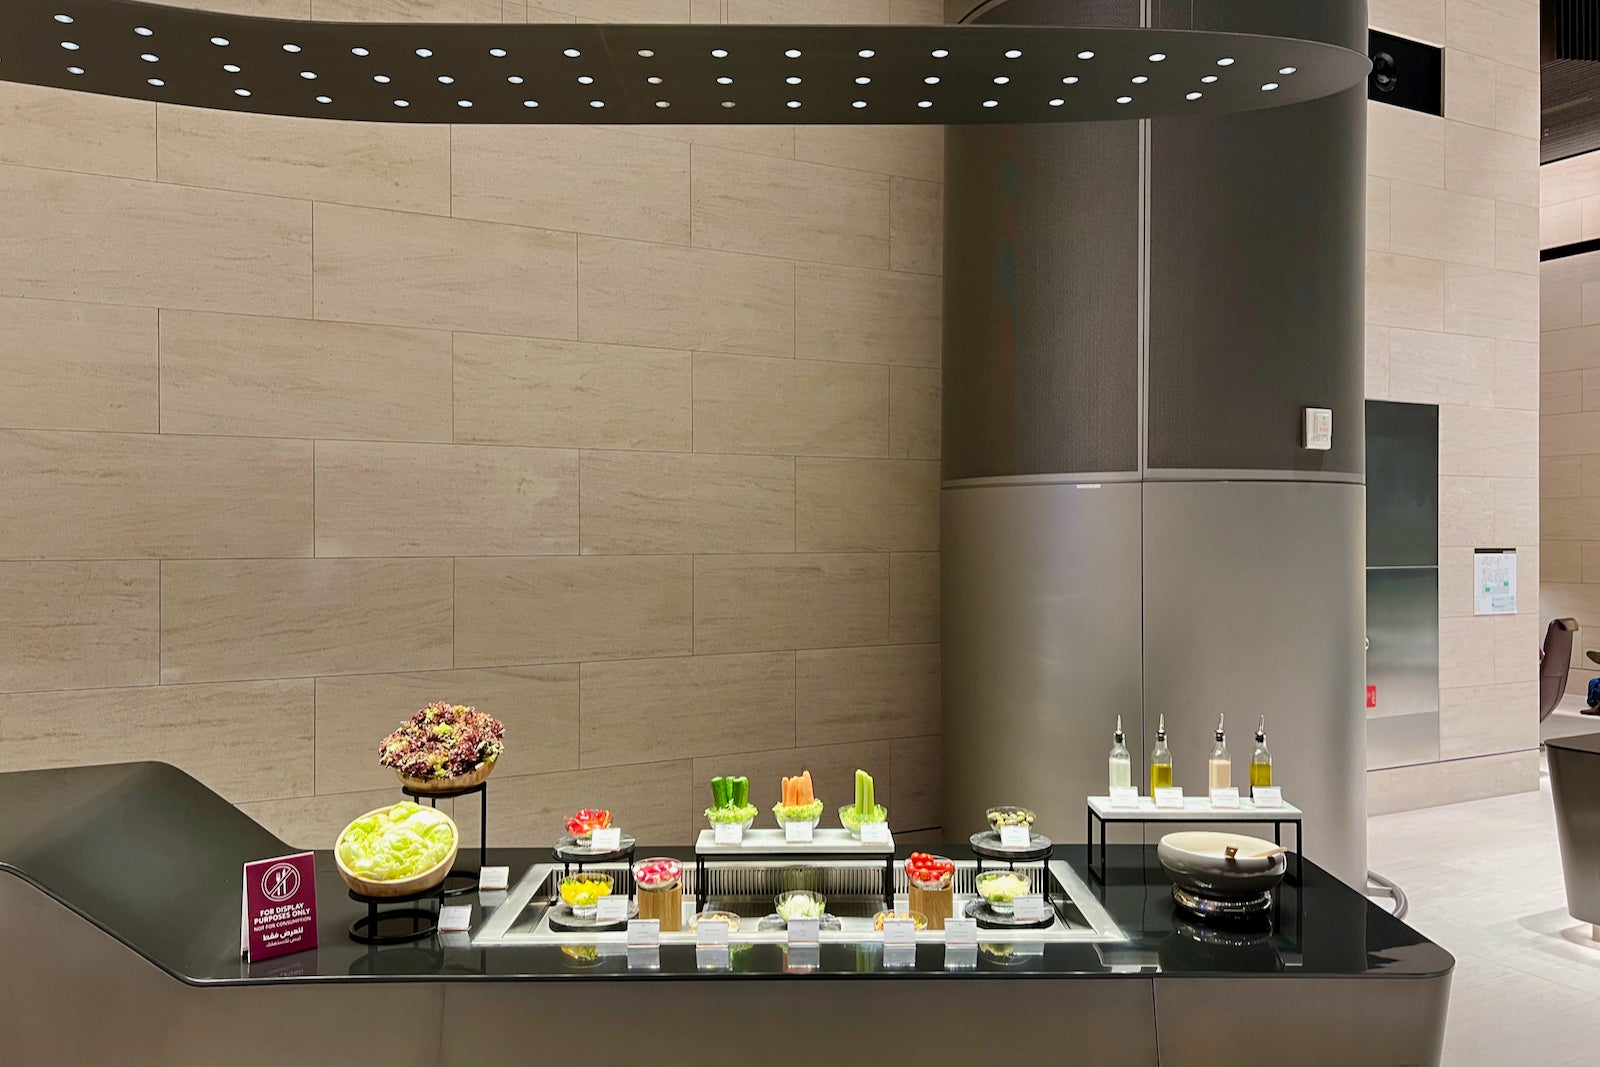 For its business and first-class passengers, Qatar Airways has opened the  world's first Louis Vuitton lounge at Doha airport. In partnership with 16  Michelin-star chef Yannick Alléno the space is accessible via